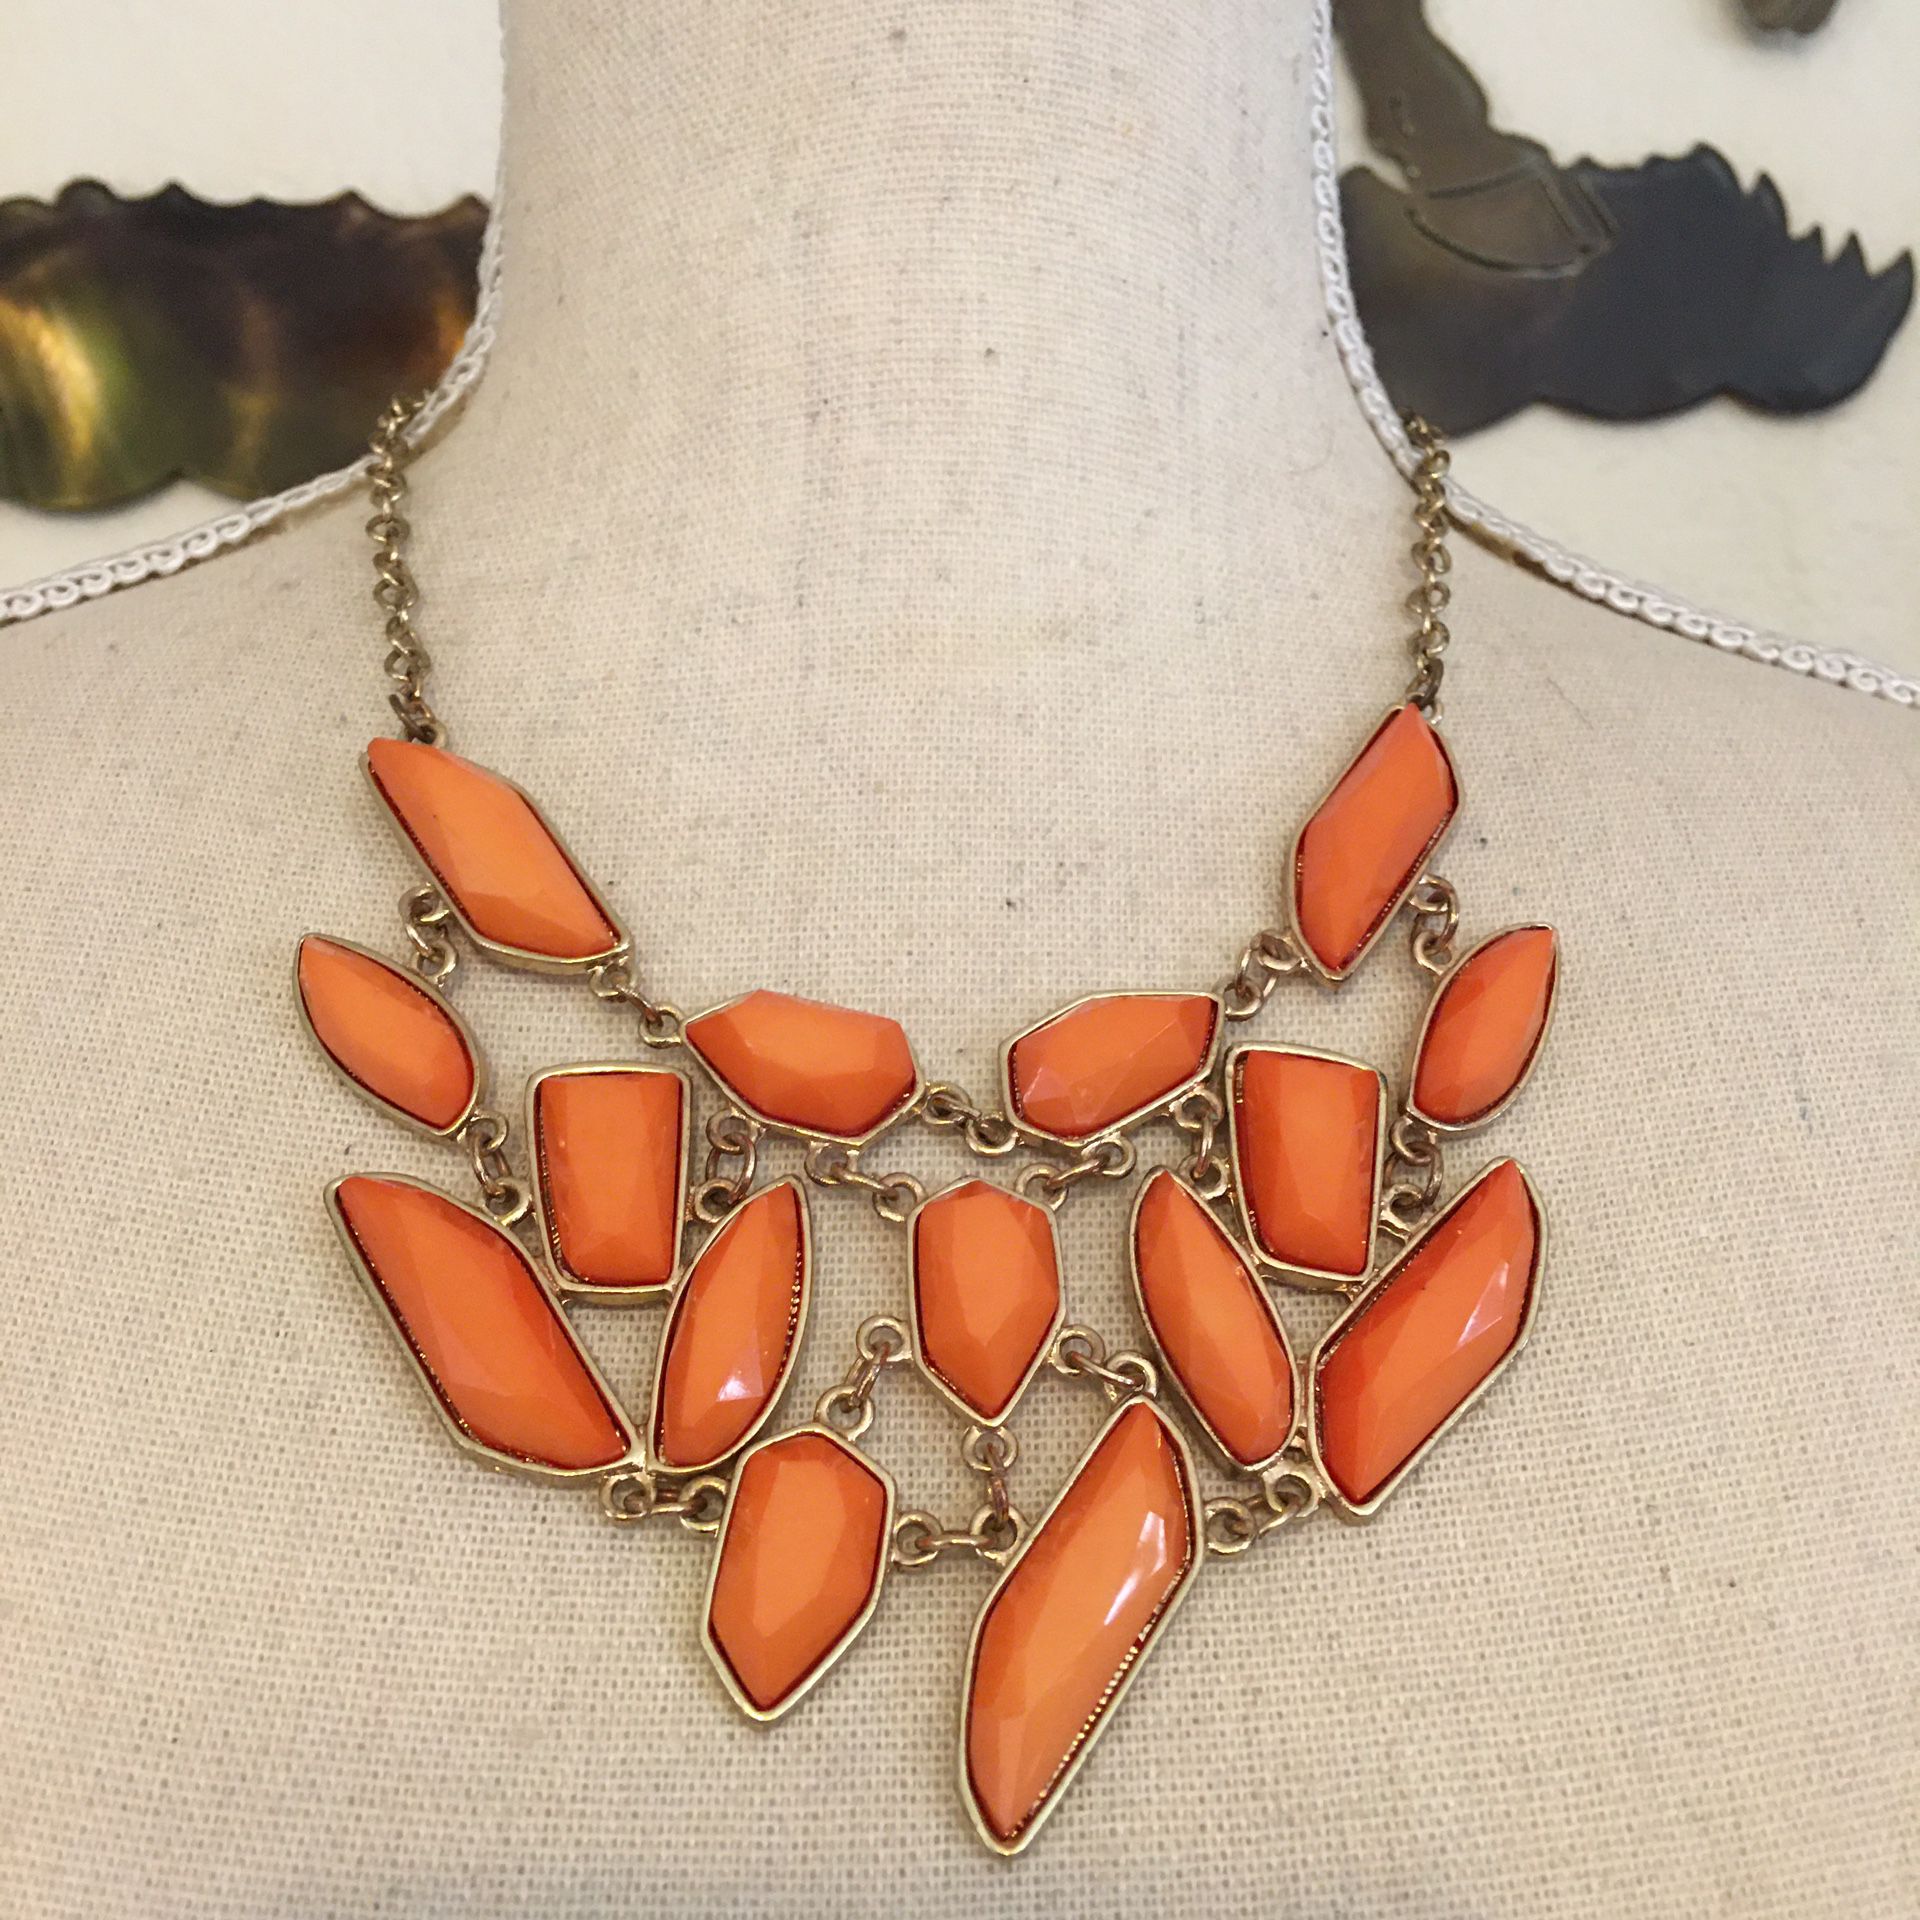 Geometric faceted stone statement necklace